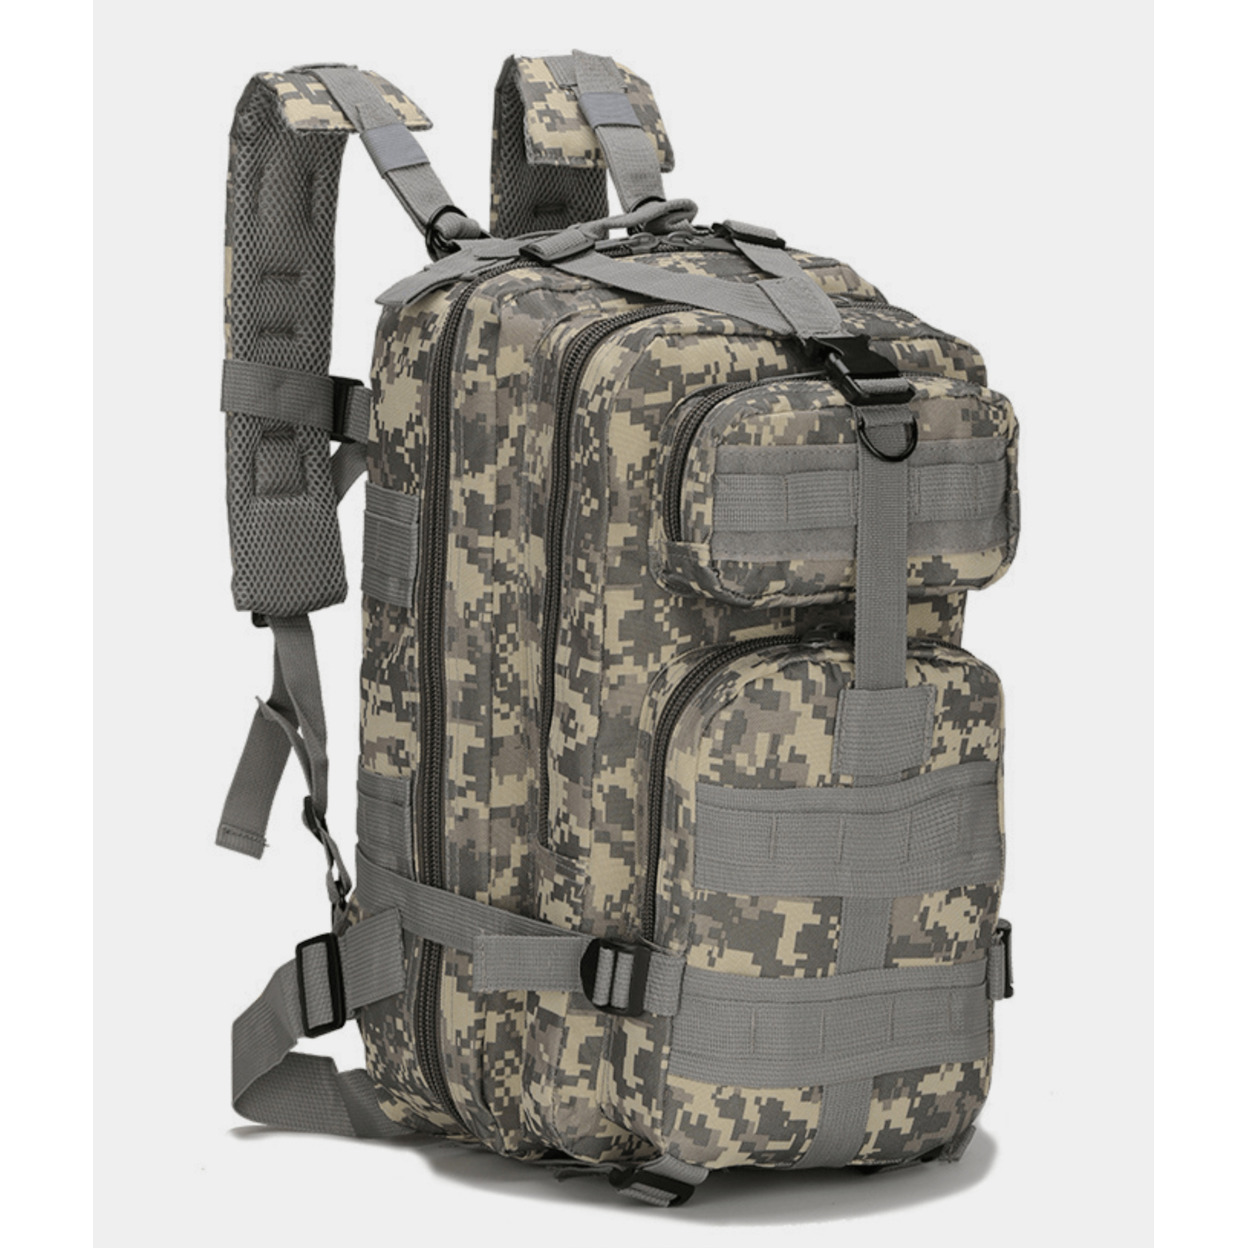 Tactical 25L Molle Backpack - ACU Camouflage